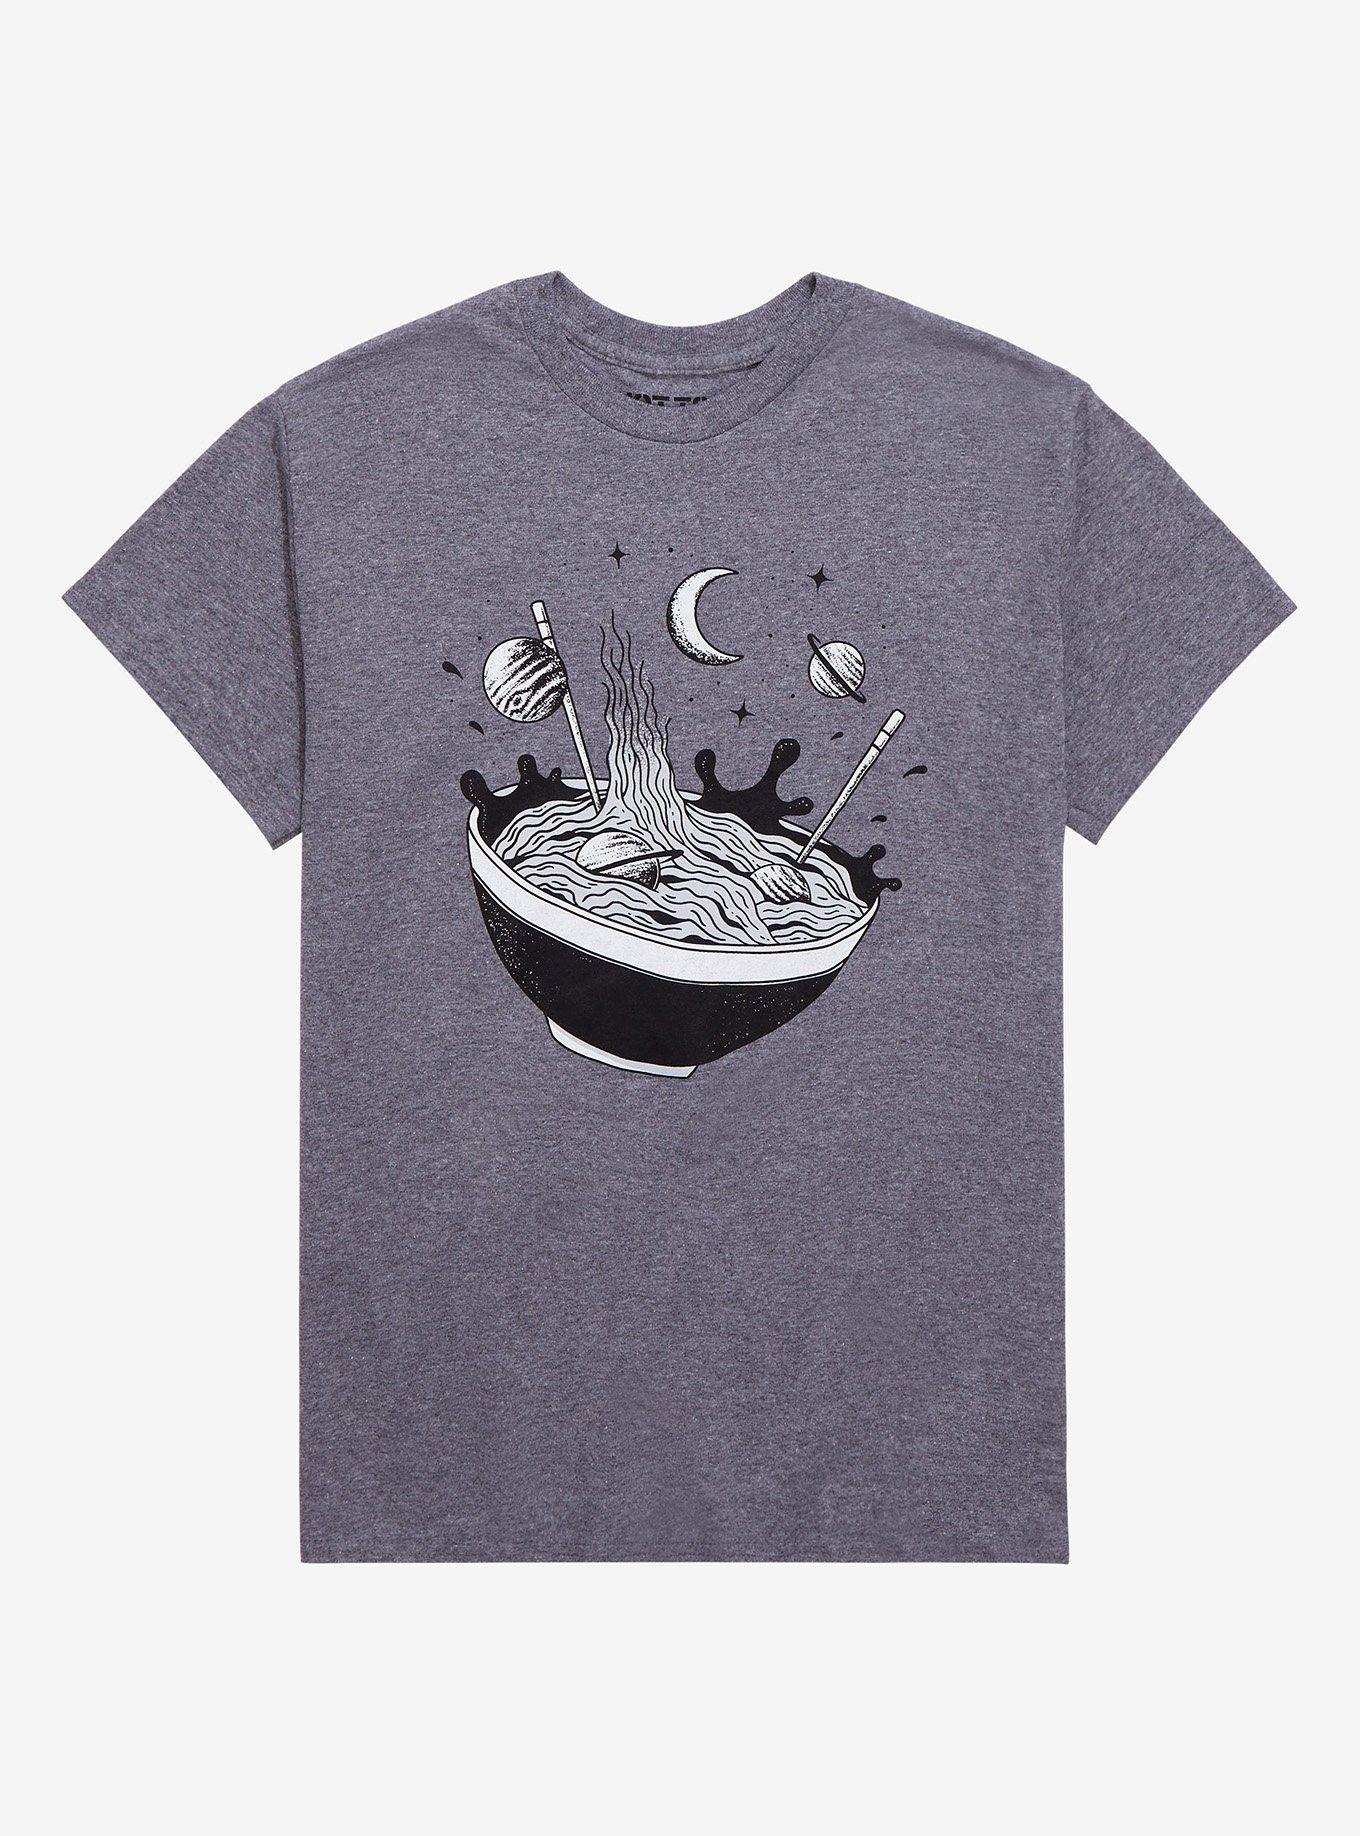 Space Ramen T-Shirt By Spacey Gracey, BLACK, hi-res